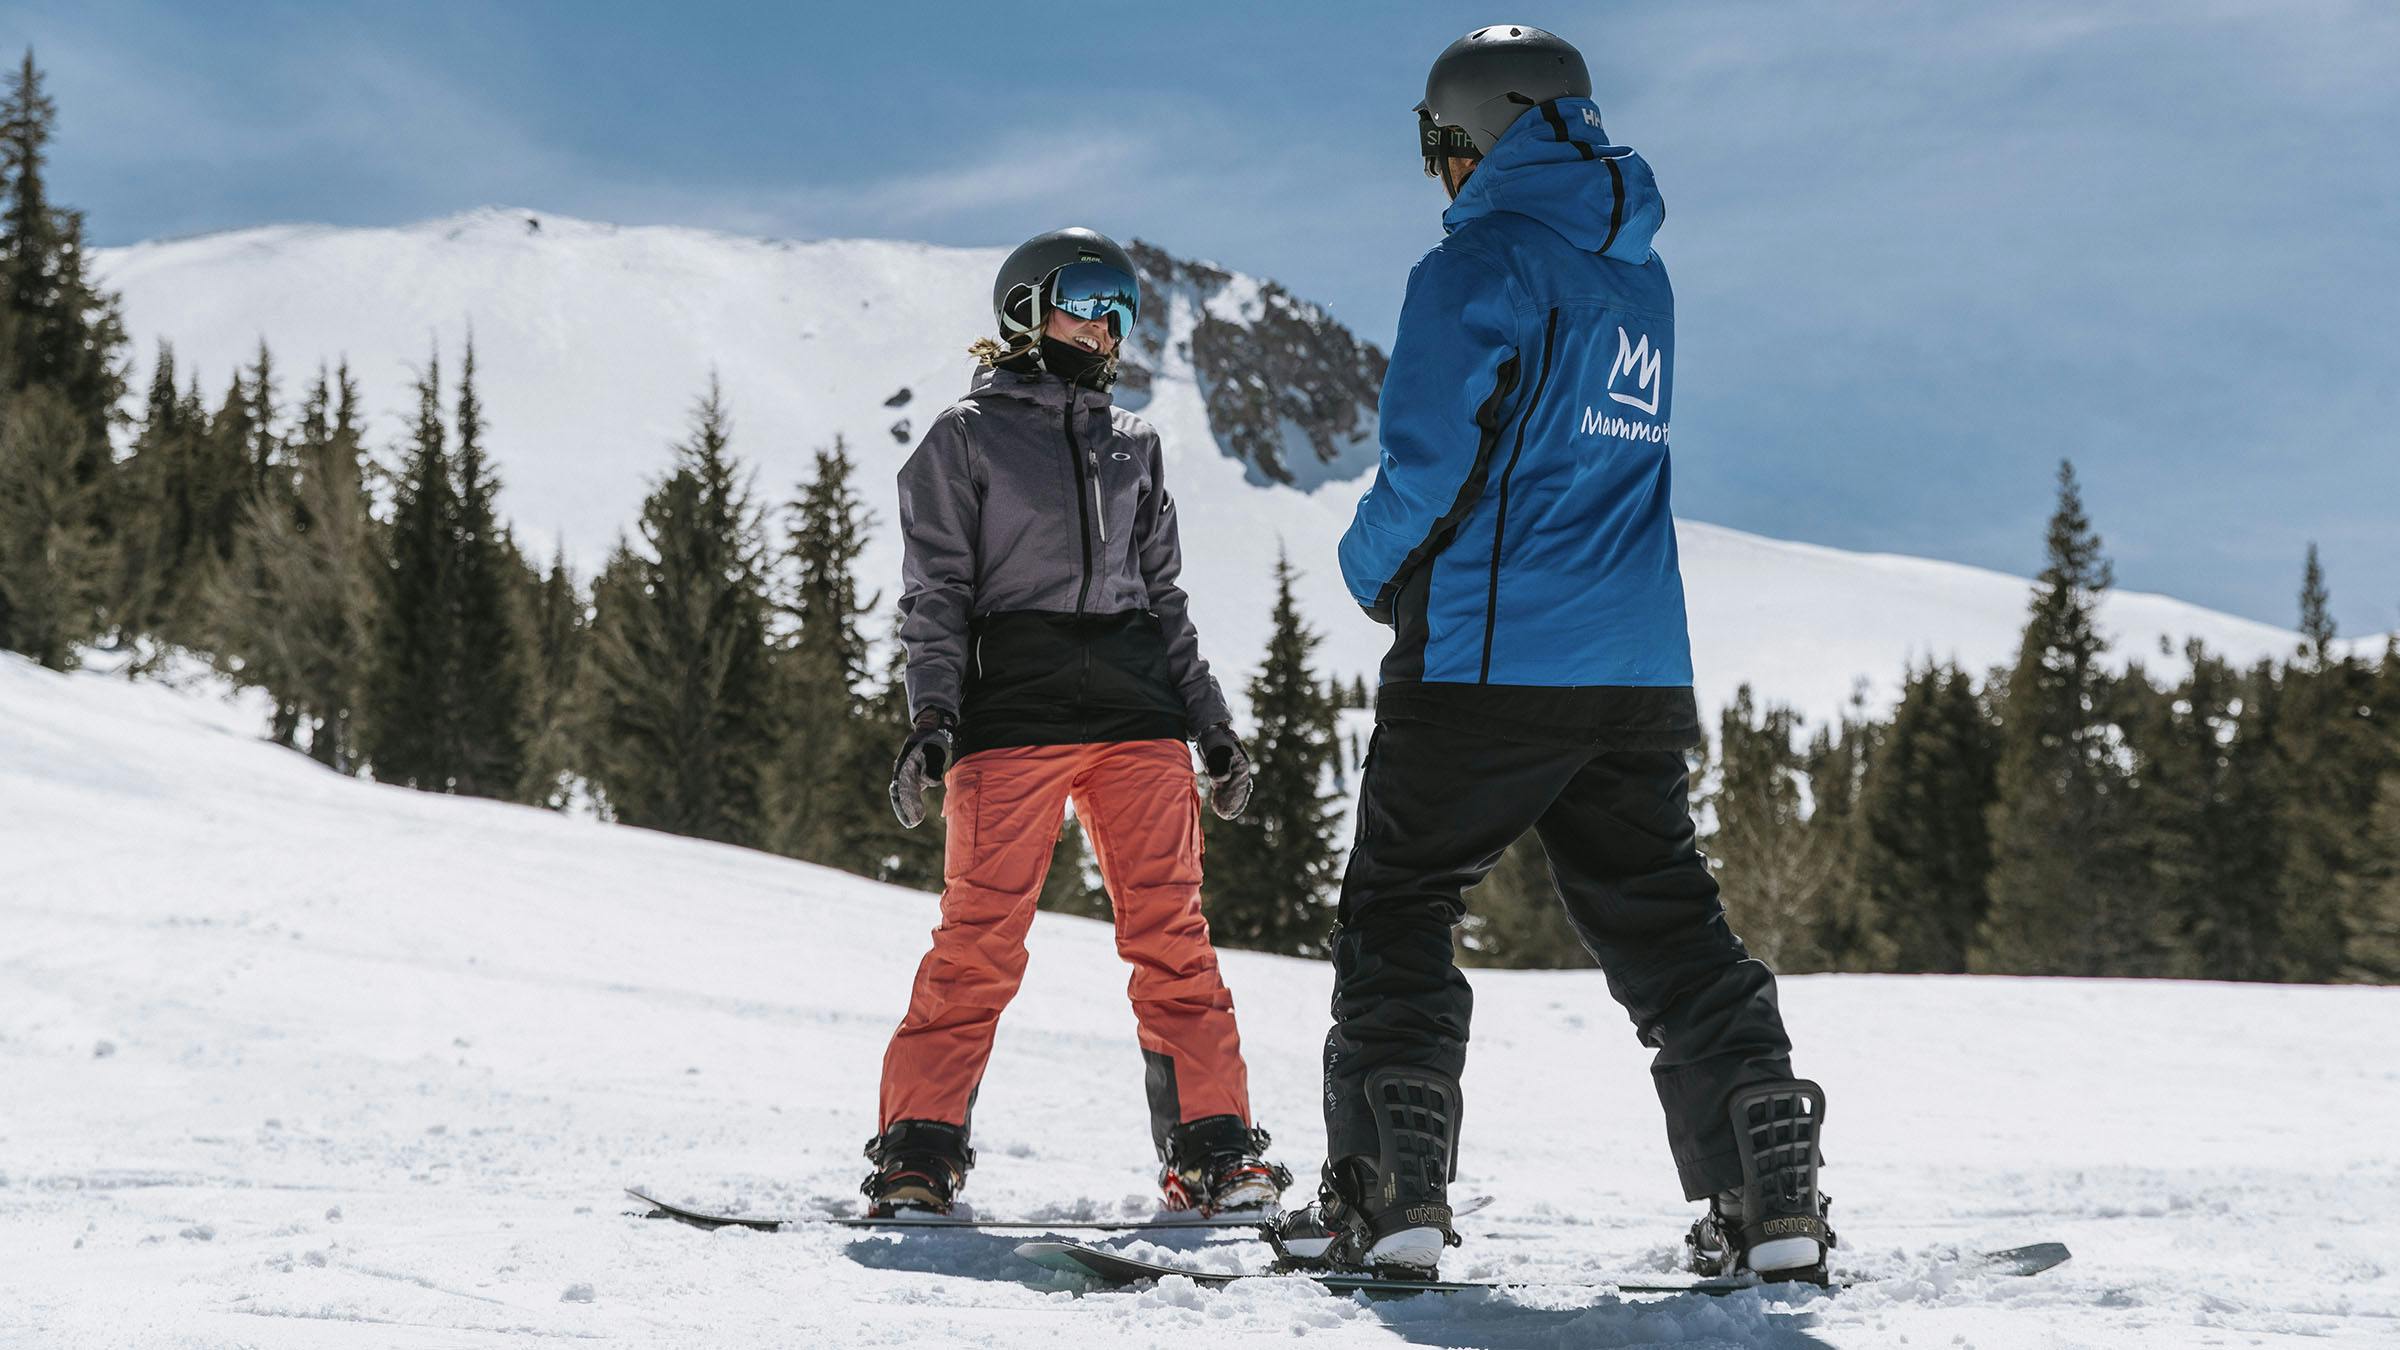 Snowboarder and instructor